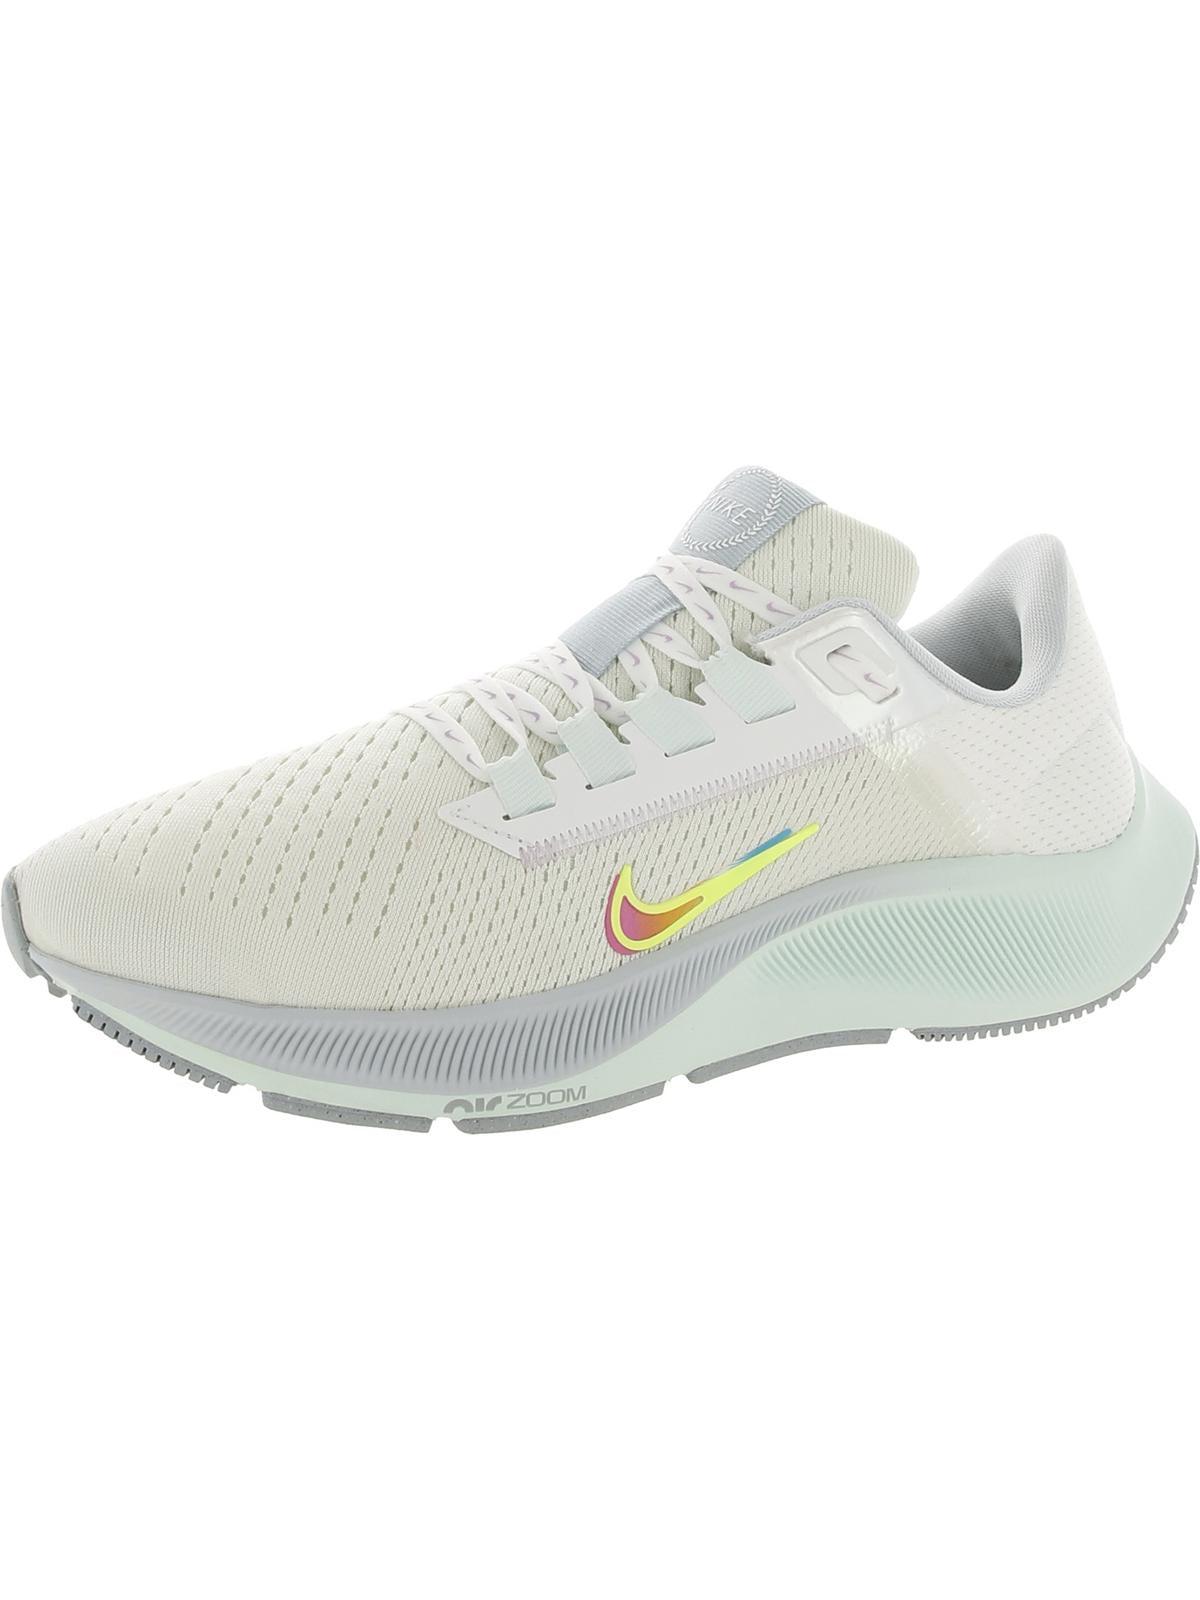 Nike Air Zoom Pegasus 38 Prm Fitness Workout Running Shoes | Lyst